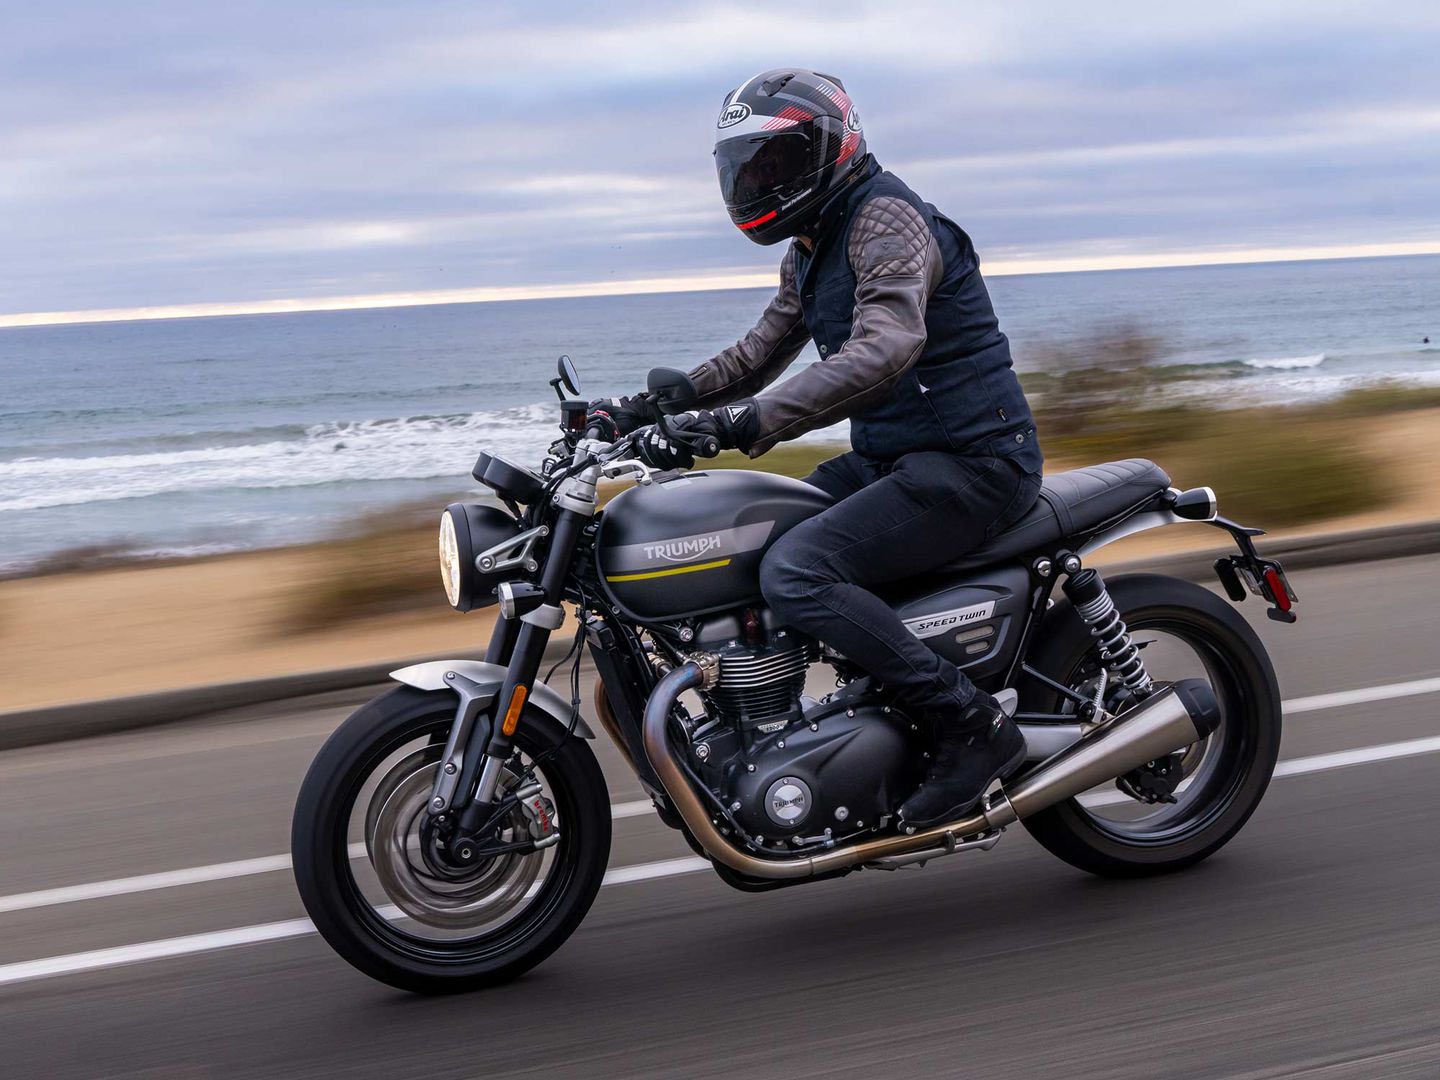 Our most popular review of the year, courtesy of the Triumph Speed Twin.